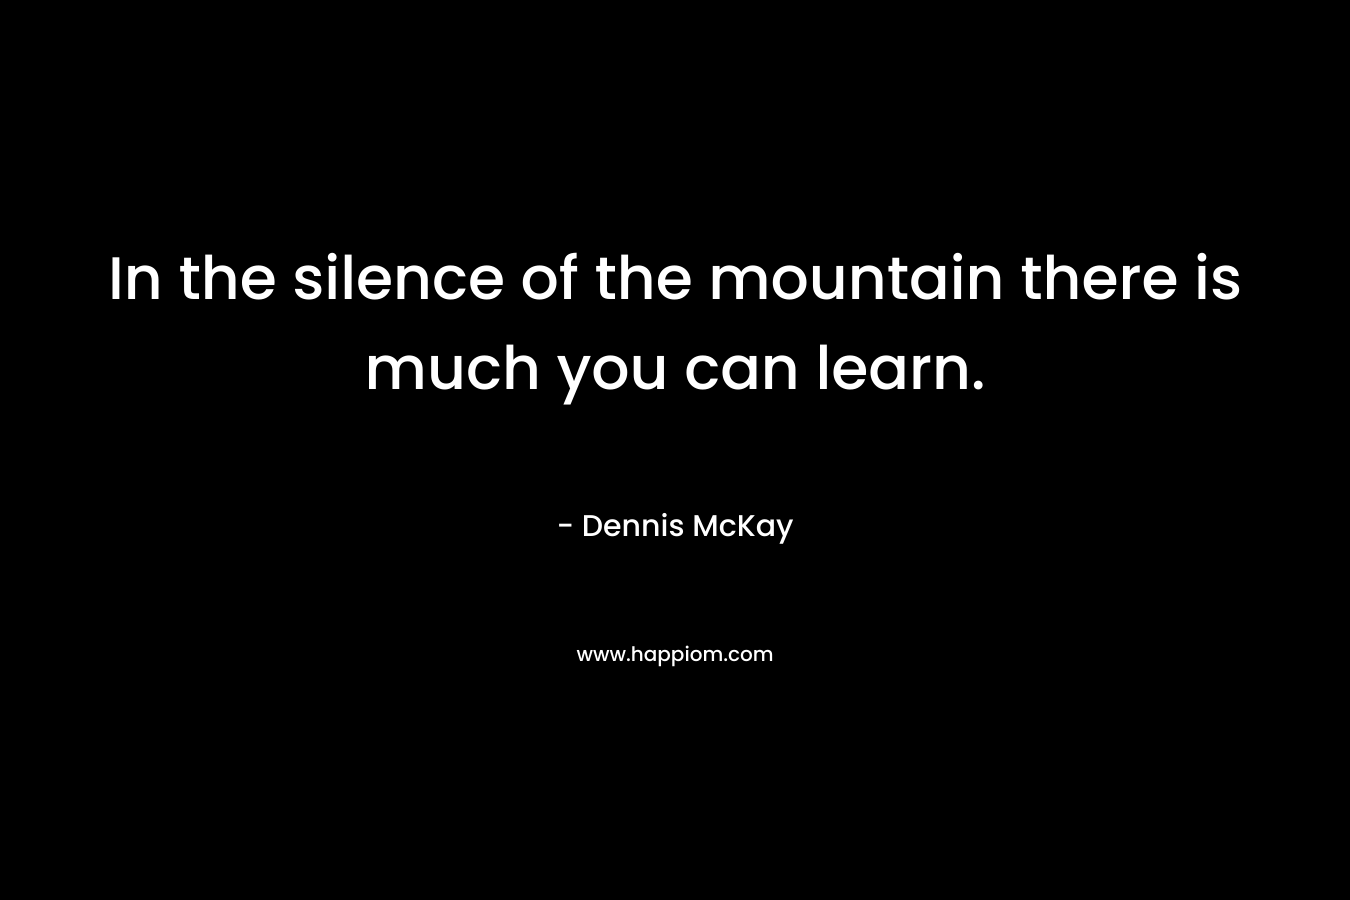 In the silence of the mountain there is much you can learn.